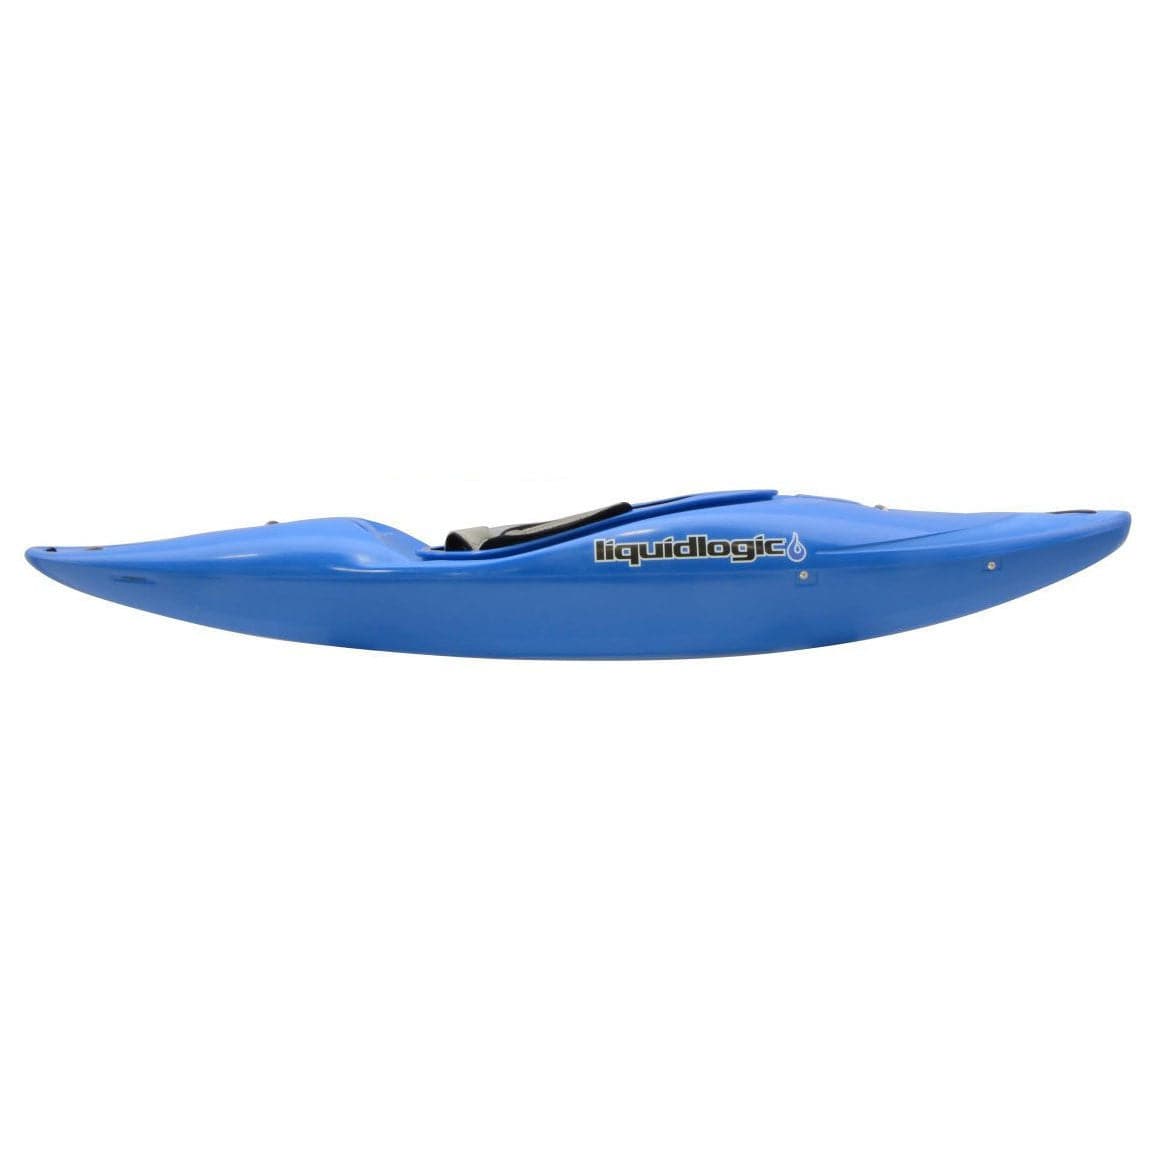 Featuring the Remix 47 kids kayak manufactured by LiquidLogic shown here from a second angle.